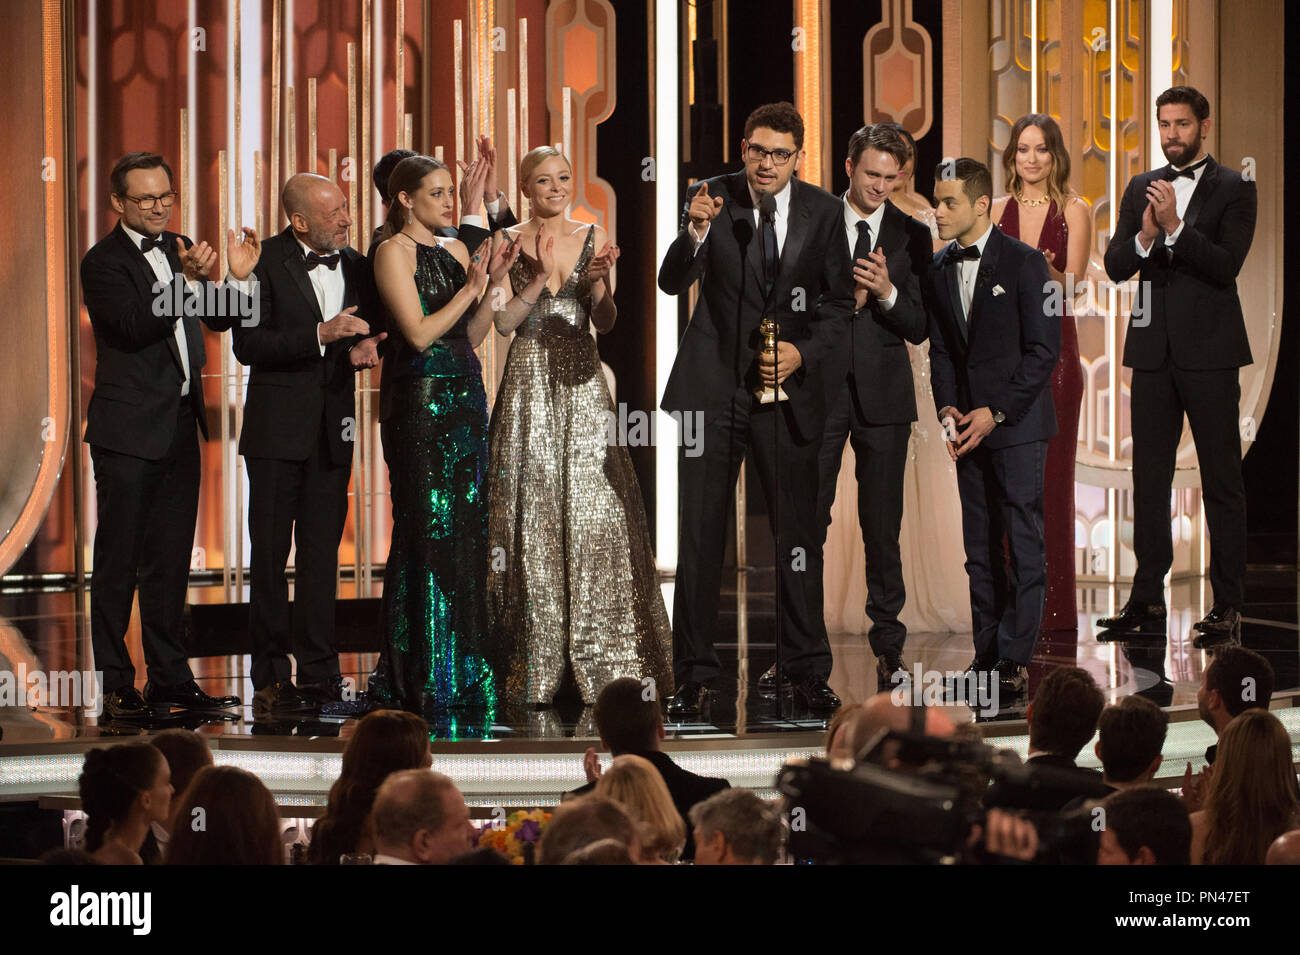 Accepting the Golden Globe for BEST TELEVISION SERIES – DRAMA for 'Mr. Robot' (USA Network) are Christian Slater, Steve Golin, Carly Chaikin, Portia Doubleday, Sam Esmail, Martin Wallström, and Rami Malek at the 73rd Annual Golden Globe Awards at the Beverly Hilton in Beverly Hills, CA on Sunday, January 10, 2016. Stock Photo